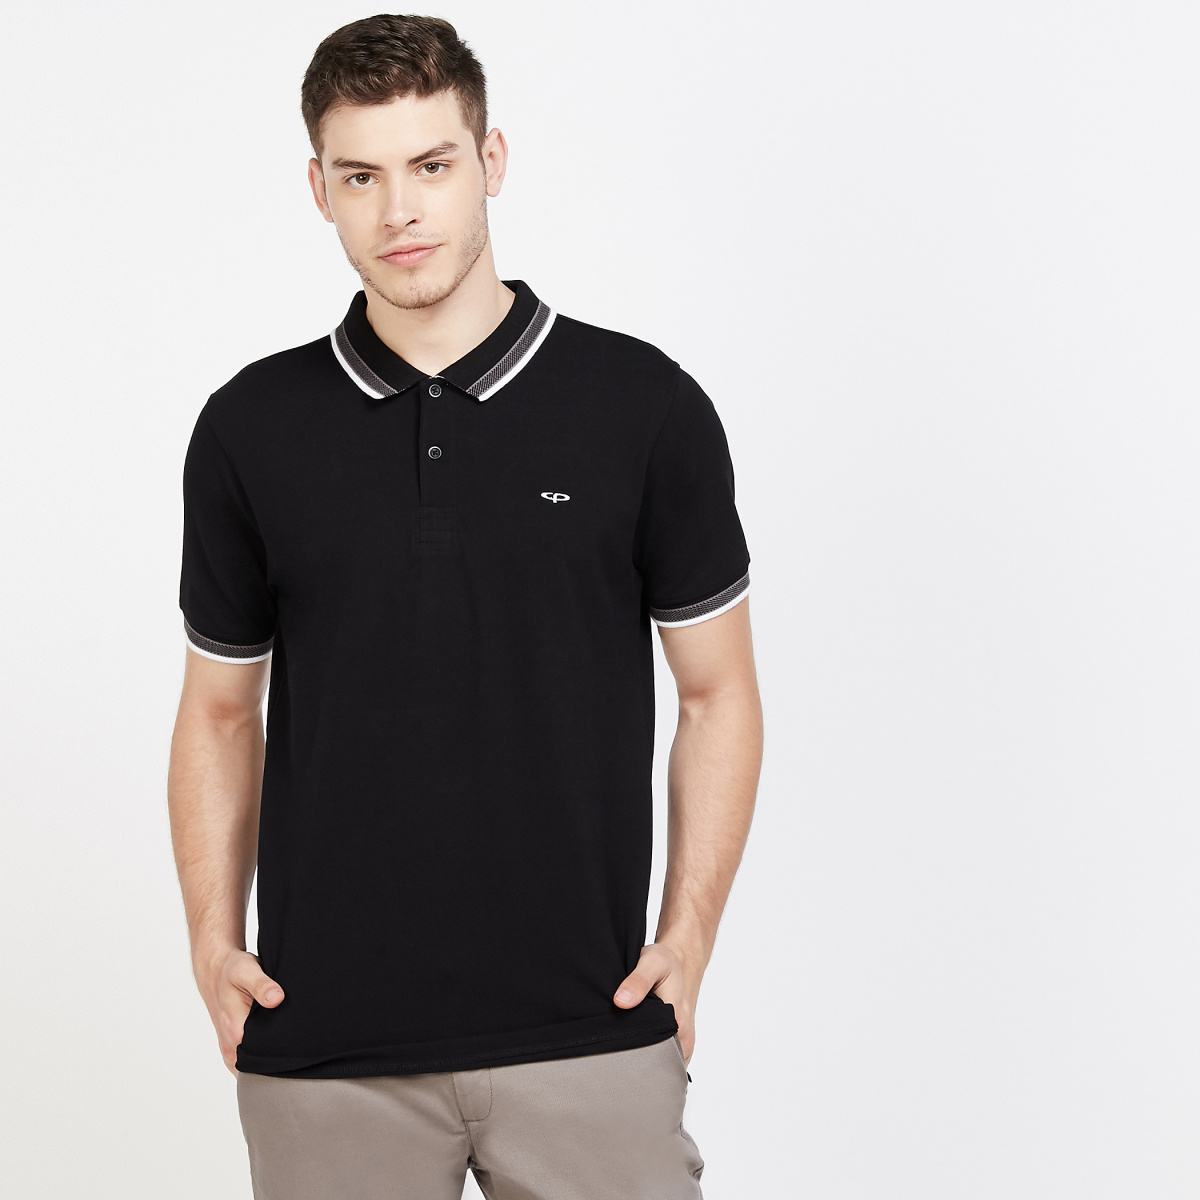 COLORPLUS Solid Regular Fit Polo T-shirt